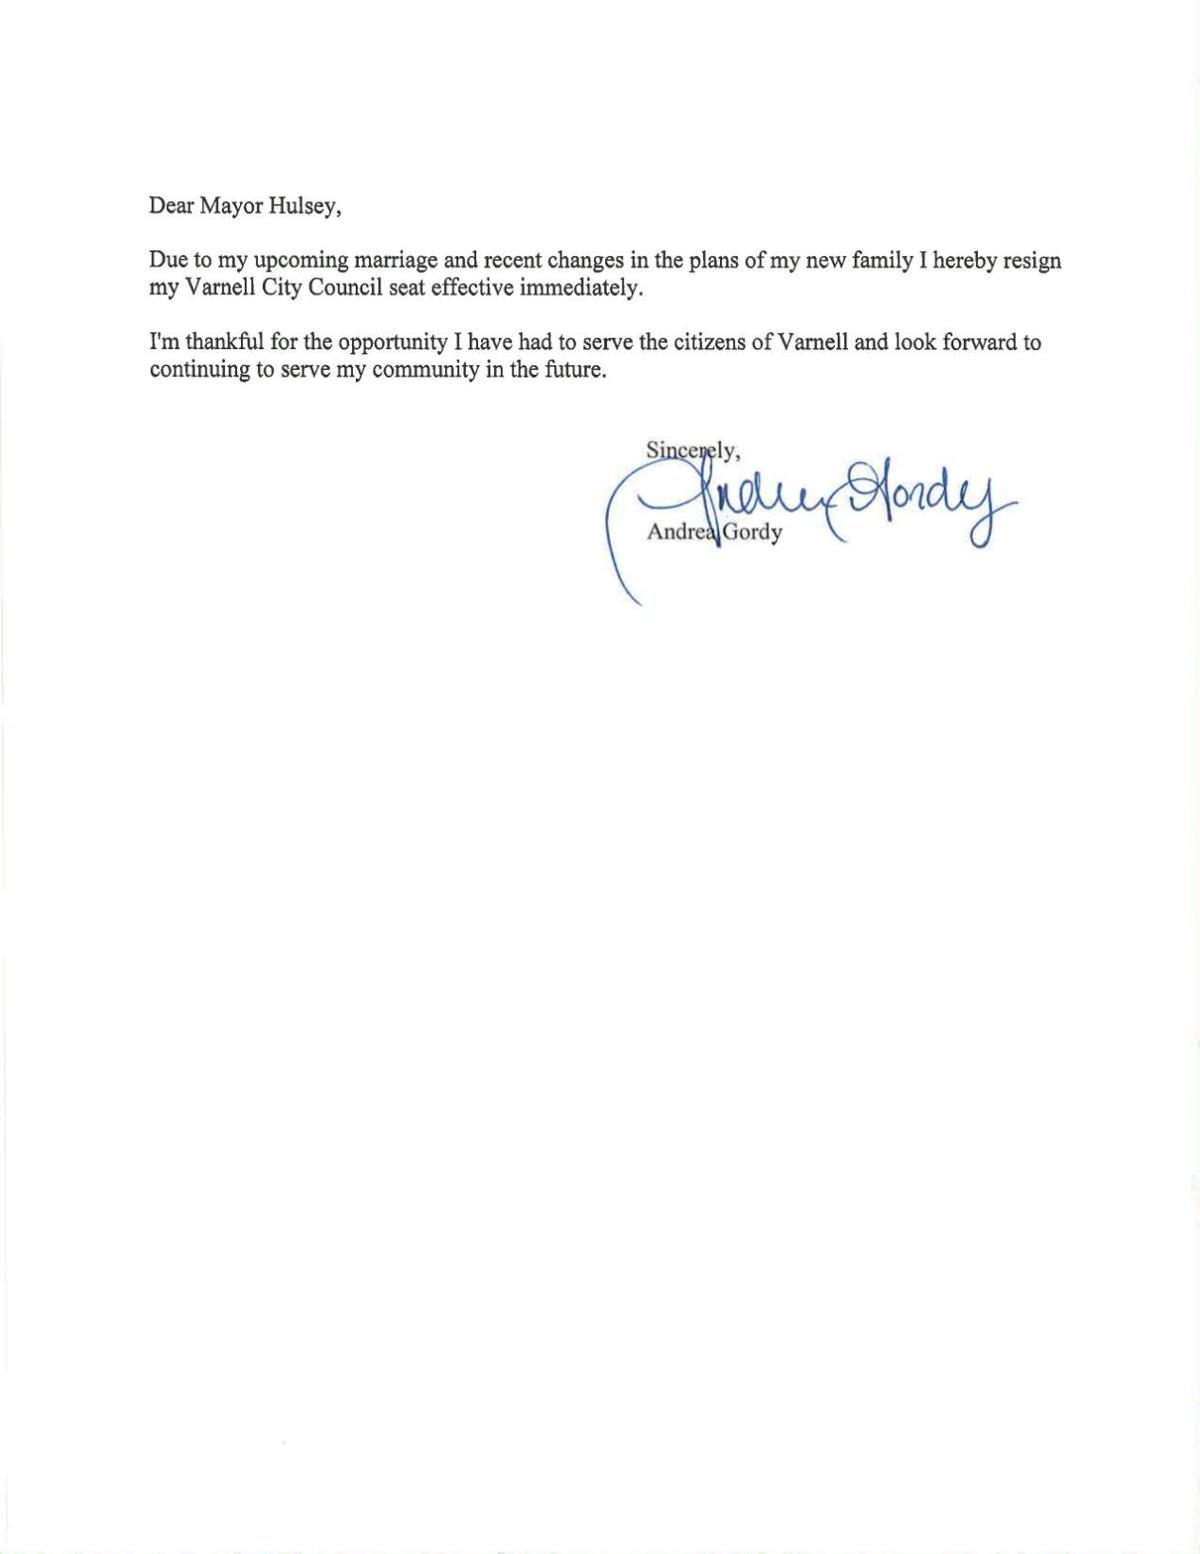 Effective Today Resignation Letter from bloximages.chicago2.vip.townnews.com